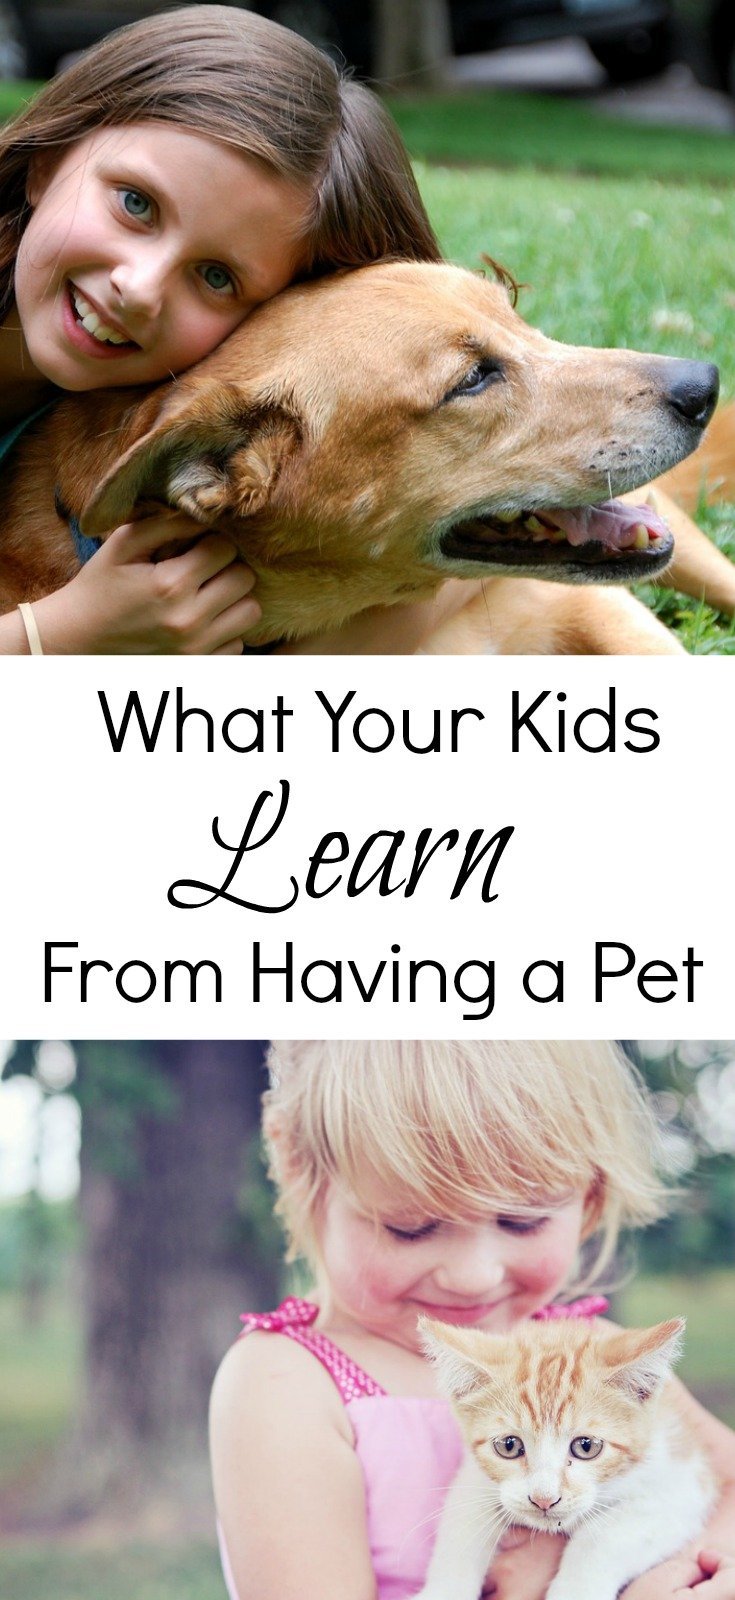 What your kids can learn from having a pet, the life lessons and responsibilities it teaches them and the types of children it can help